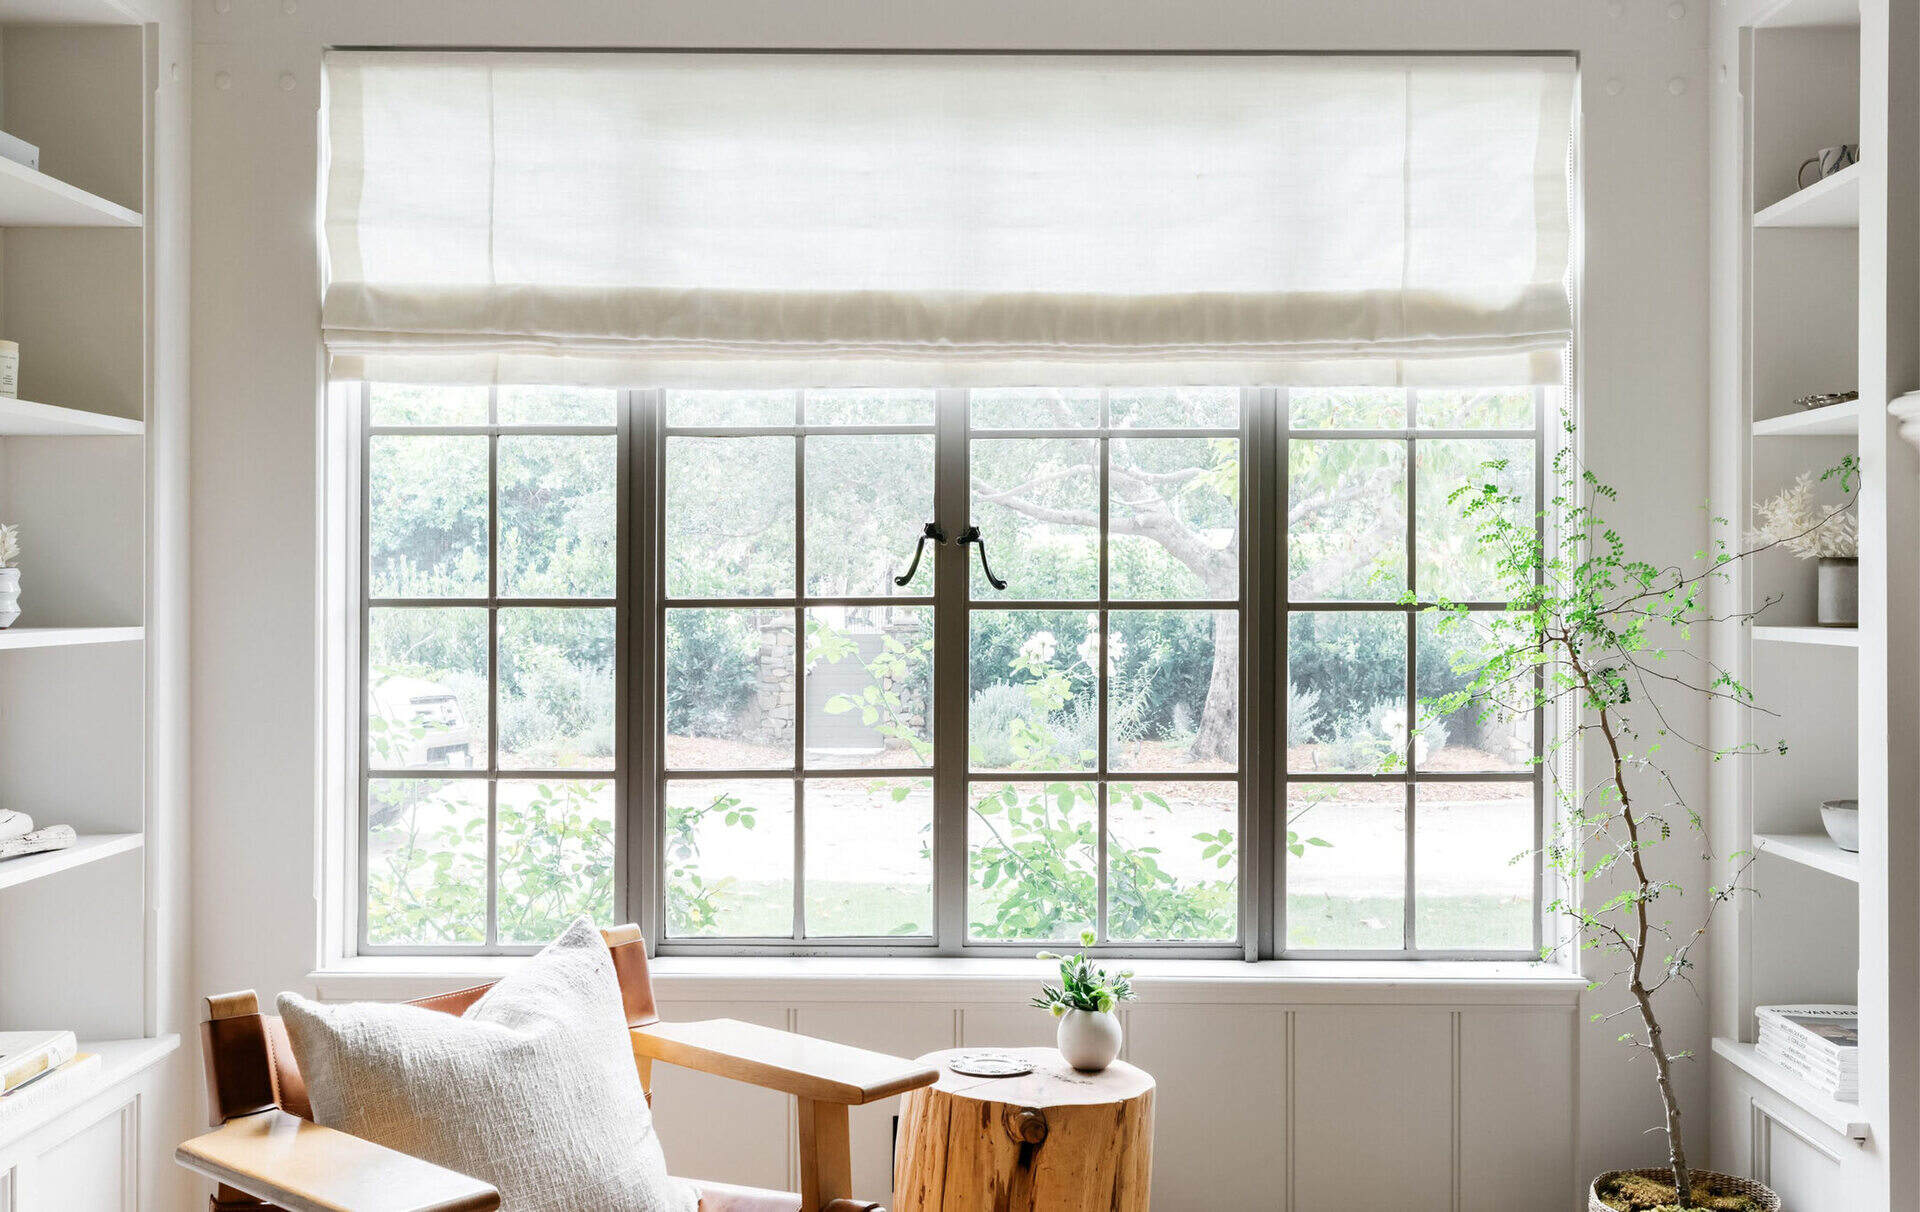 How To Attach Roman Blinds To Window